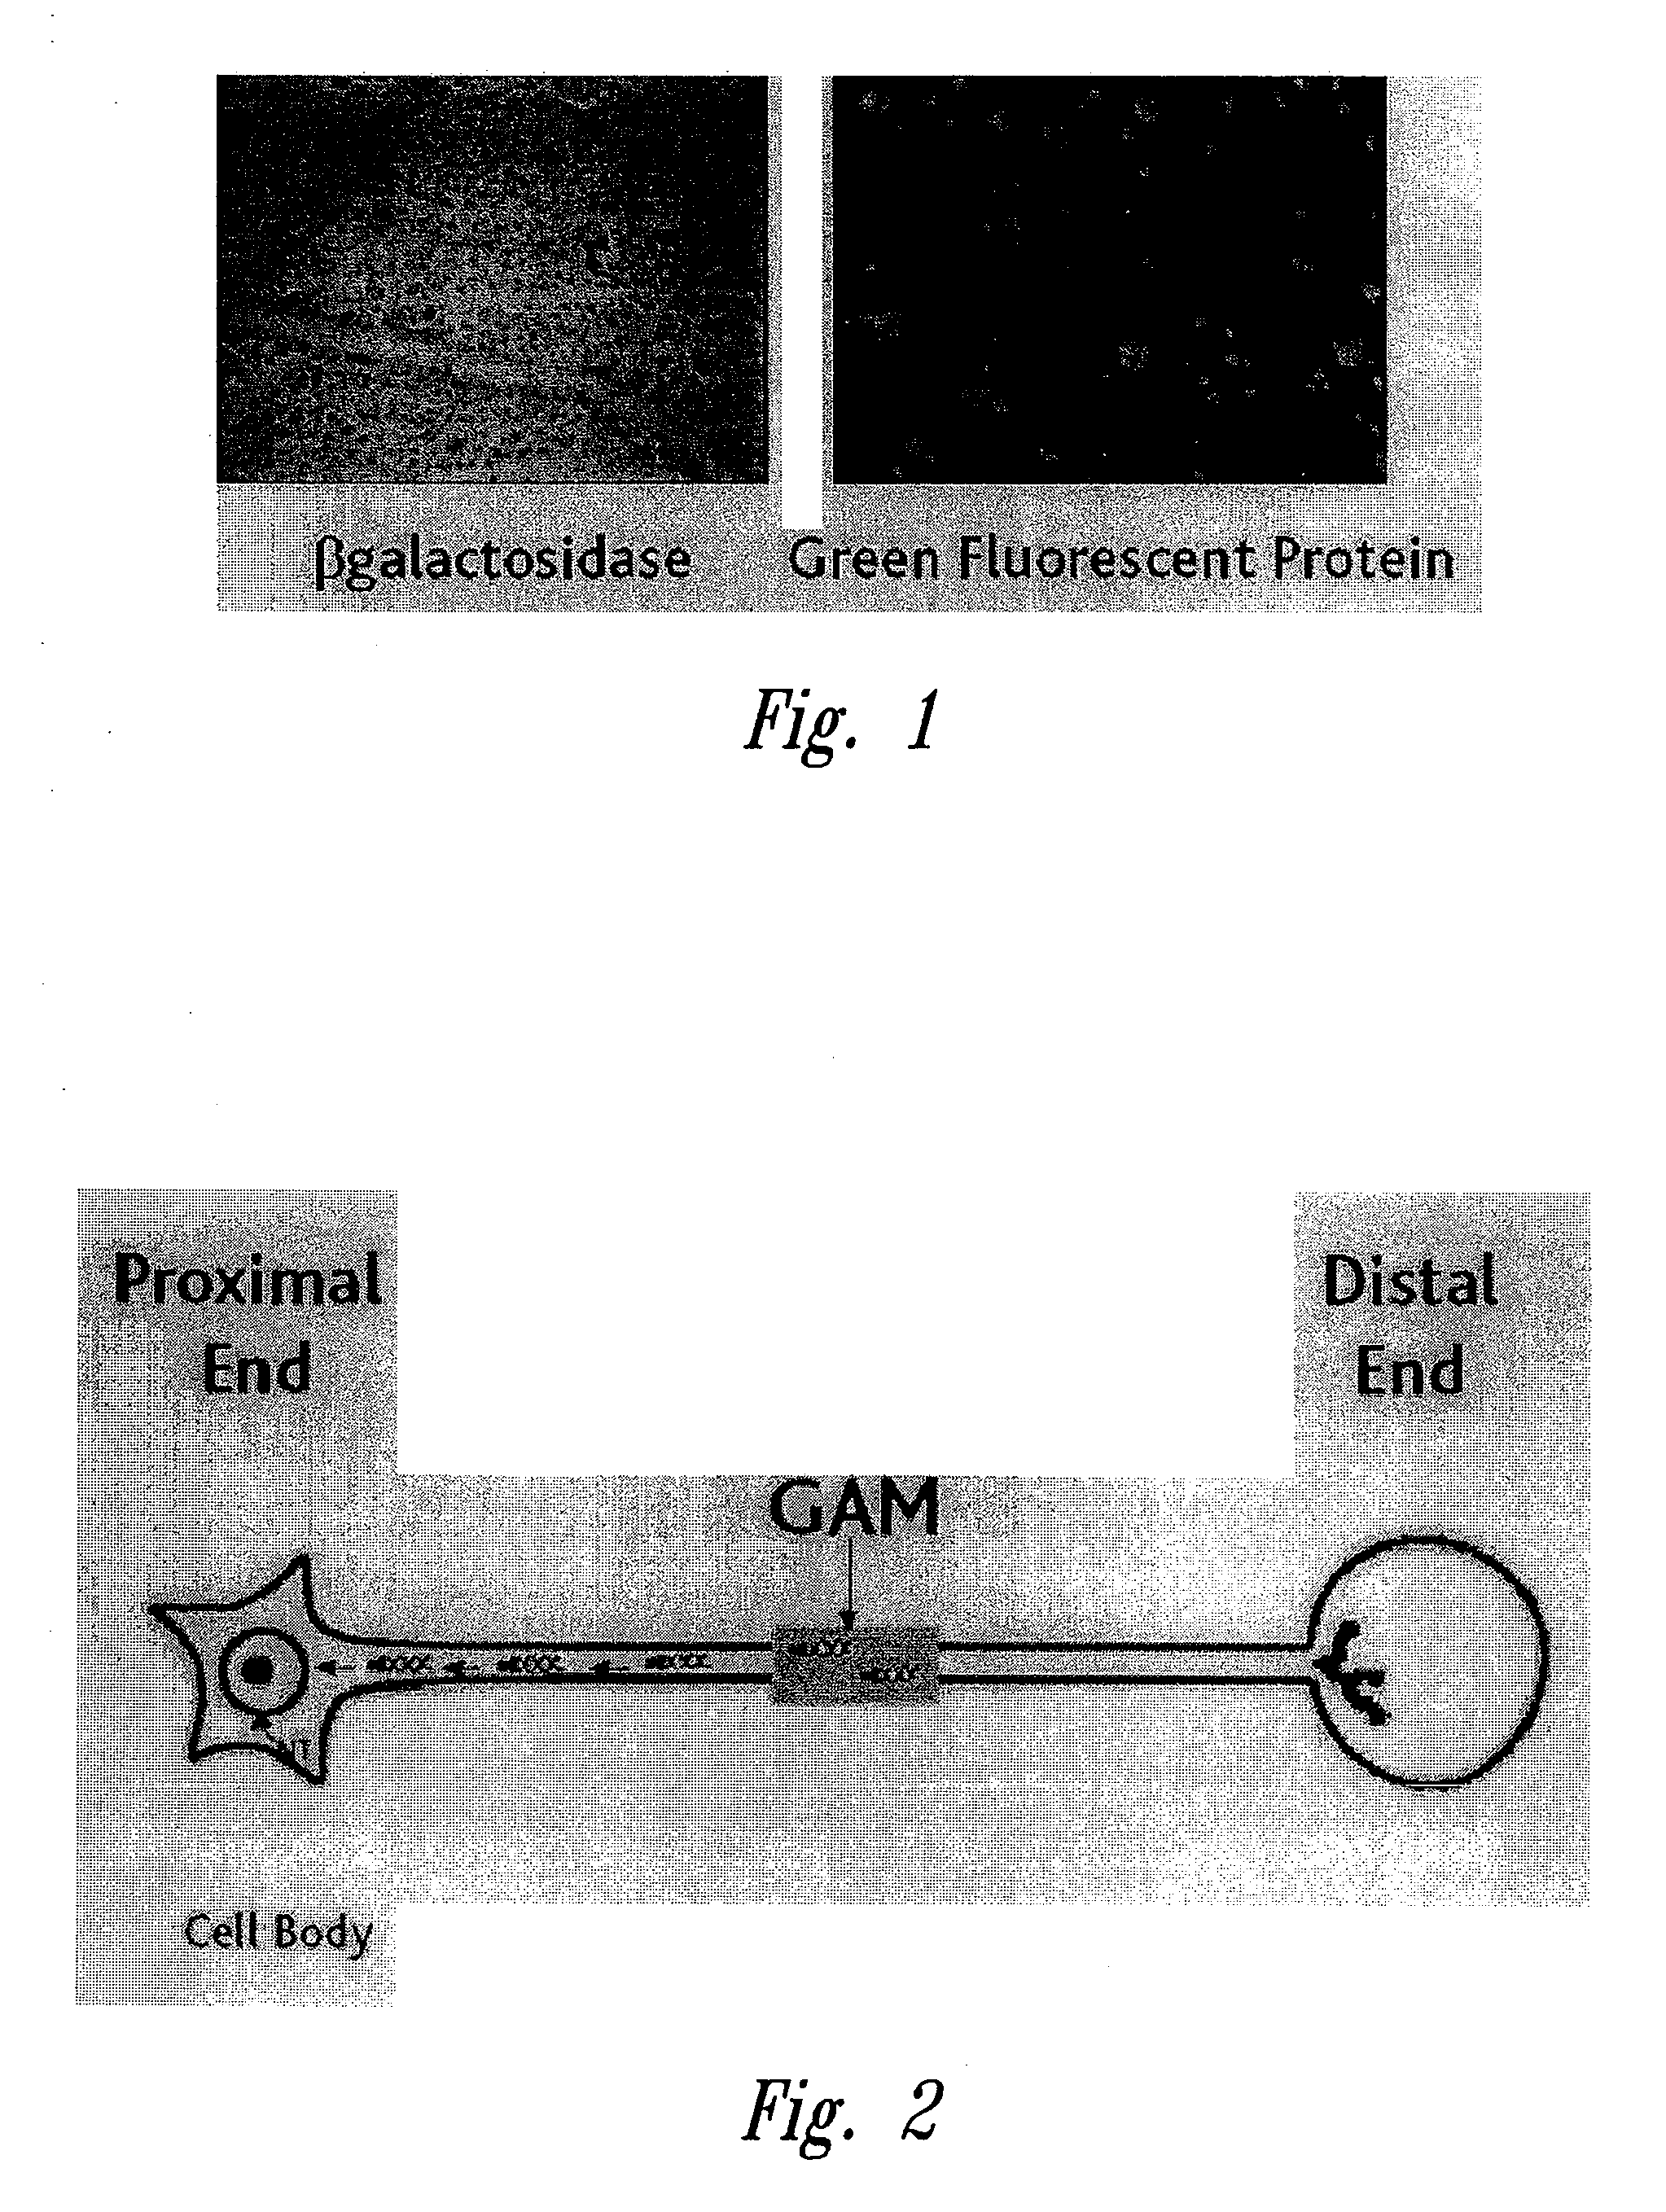 Devices containing DNA encoding neurotrophic agents and related compositions and methods